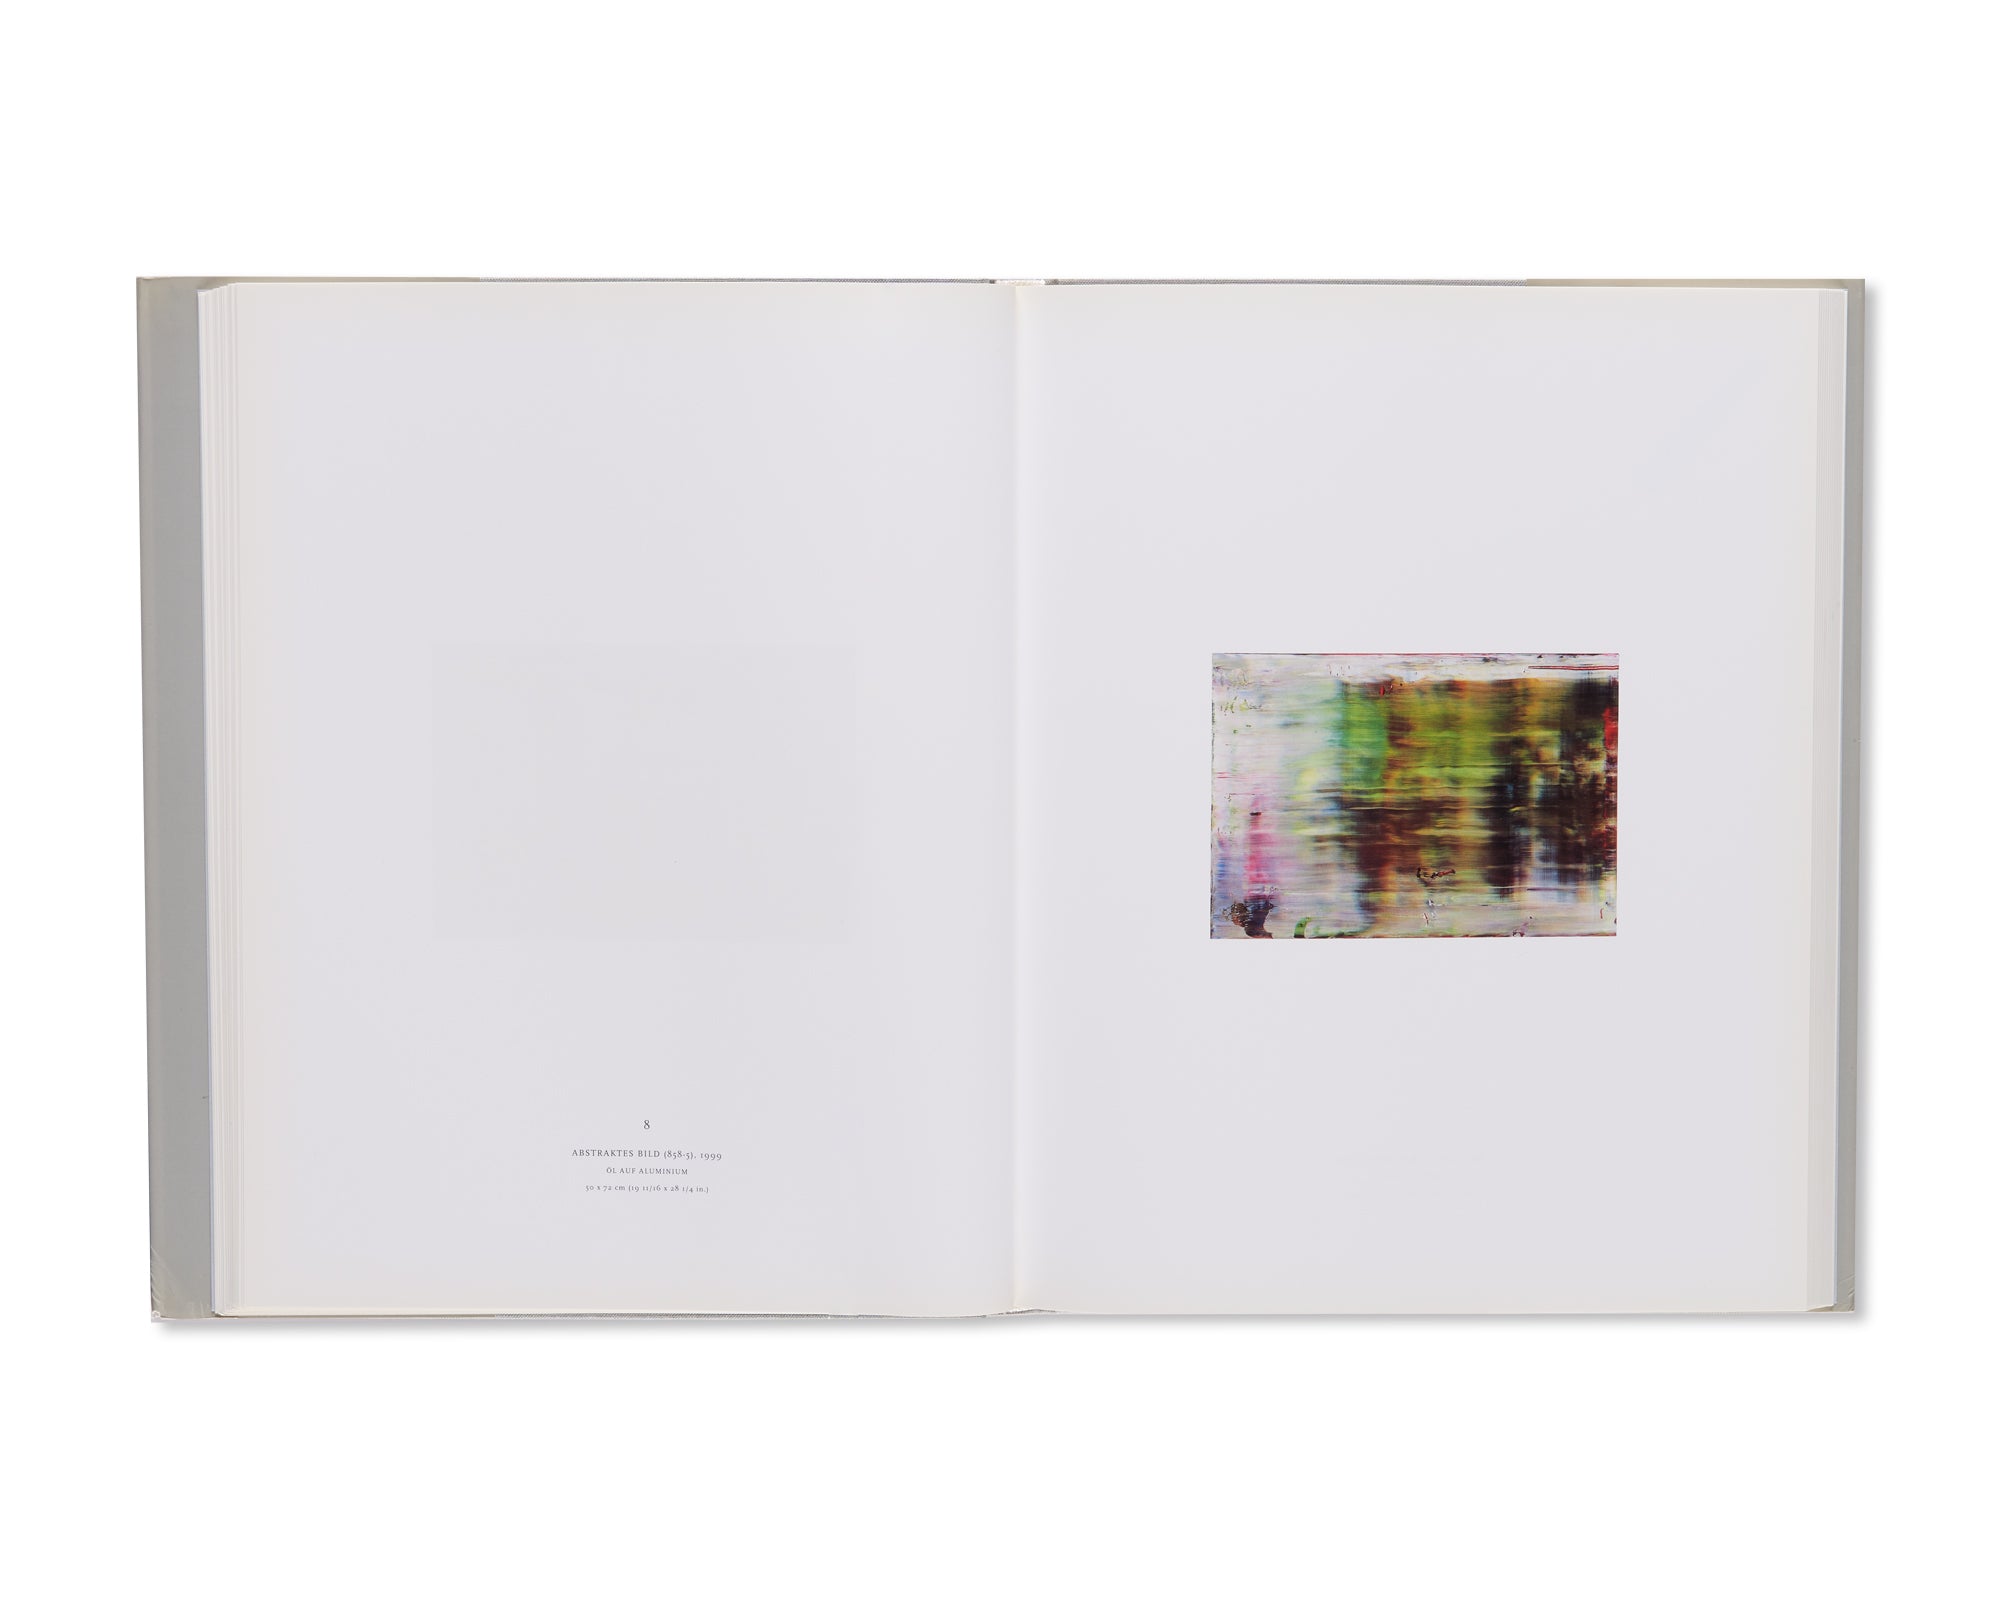 PAINTINGS 1996–2001 by Gerhard Richter